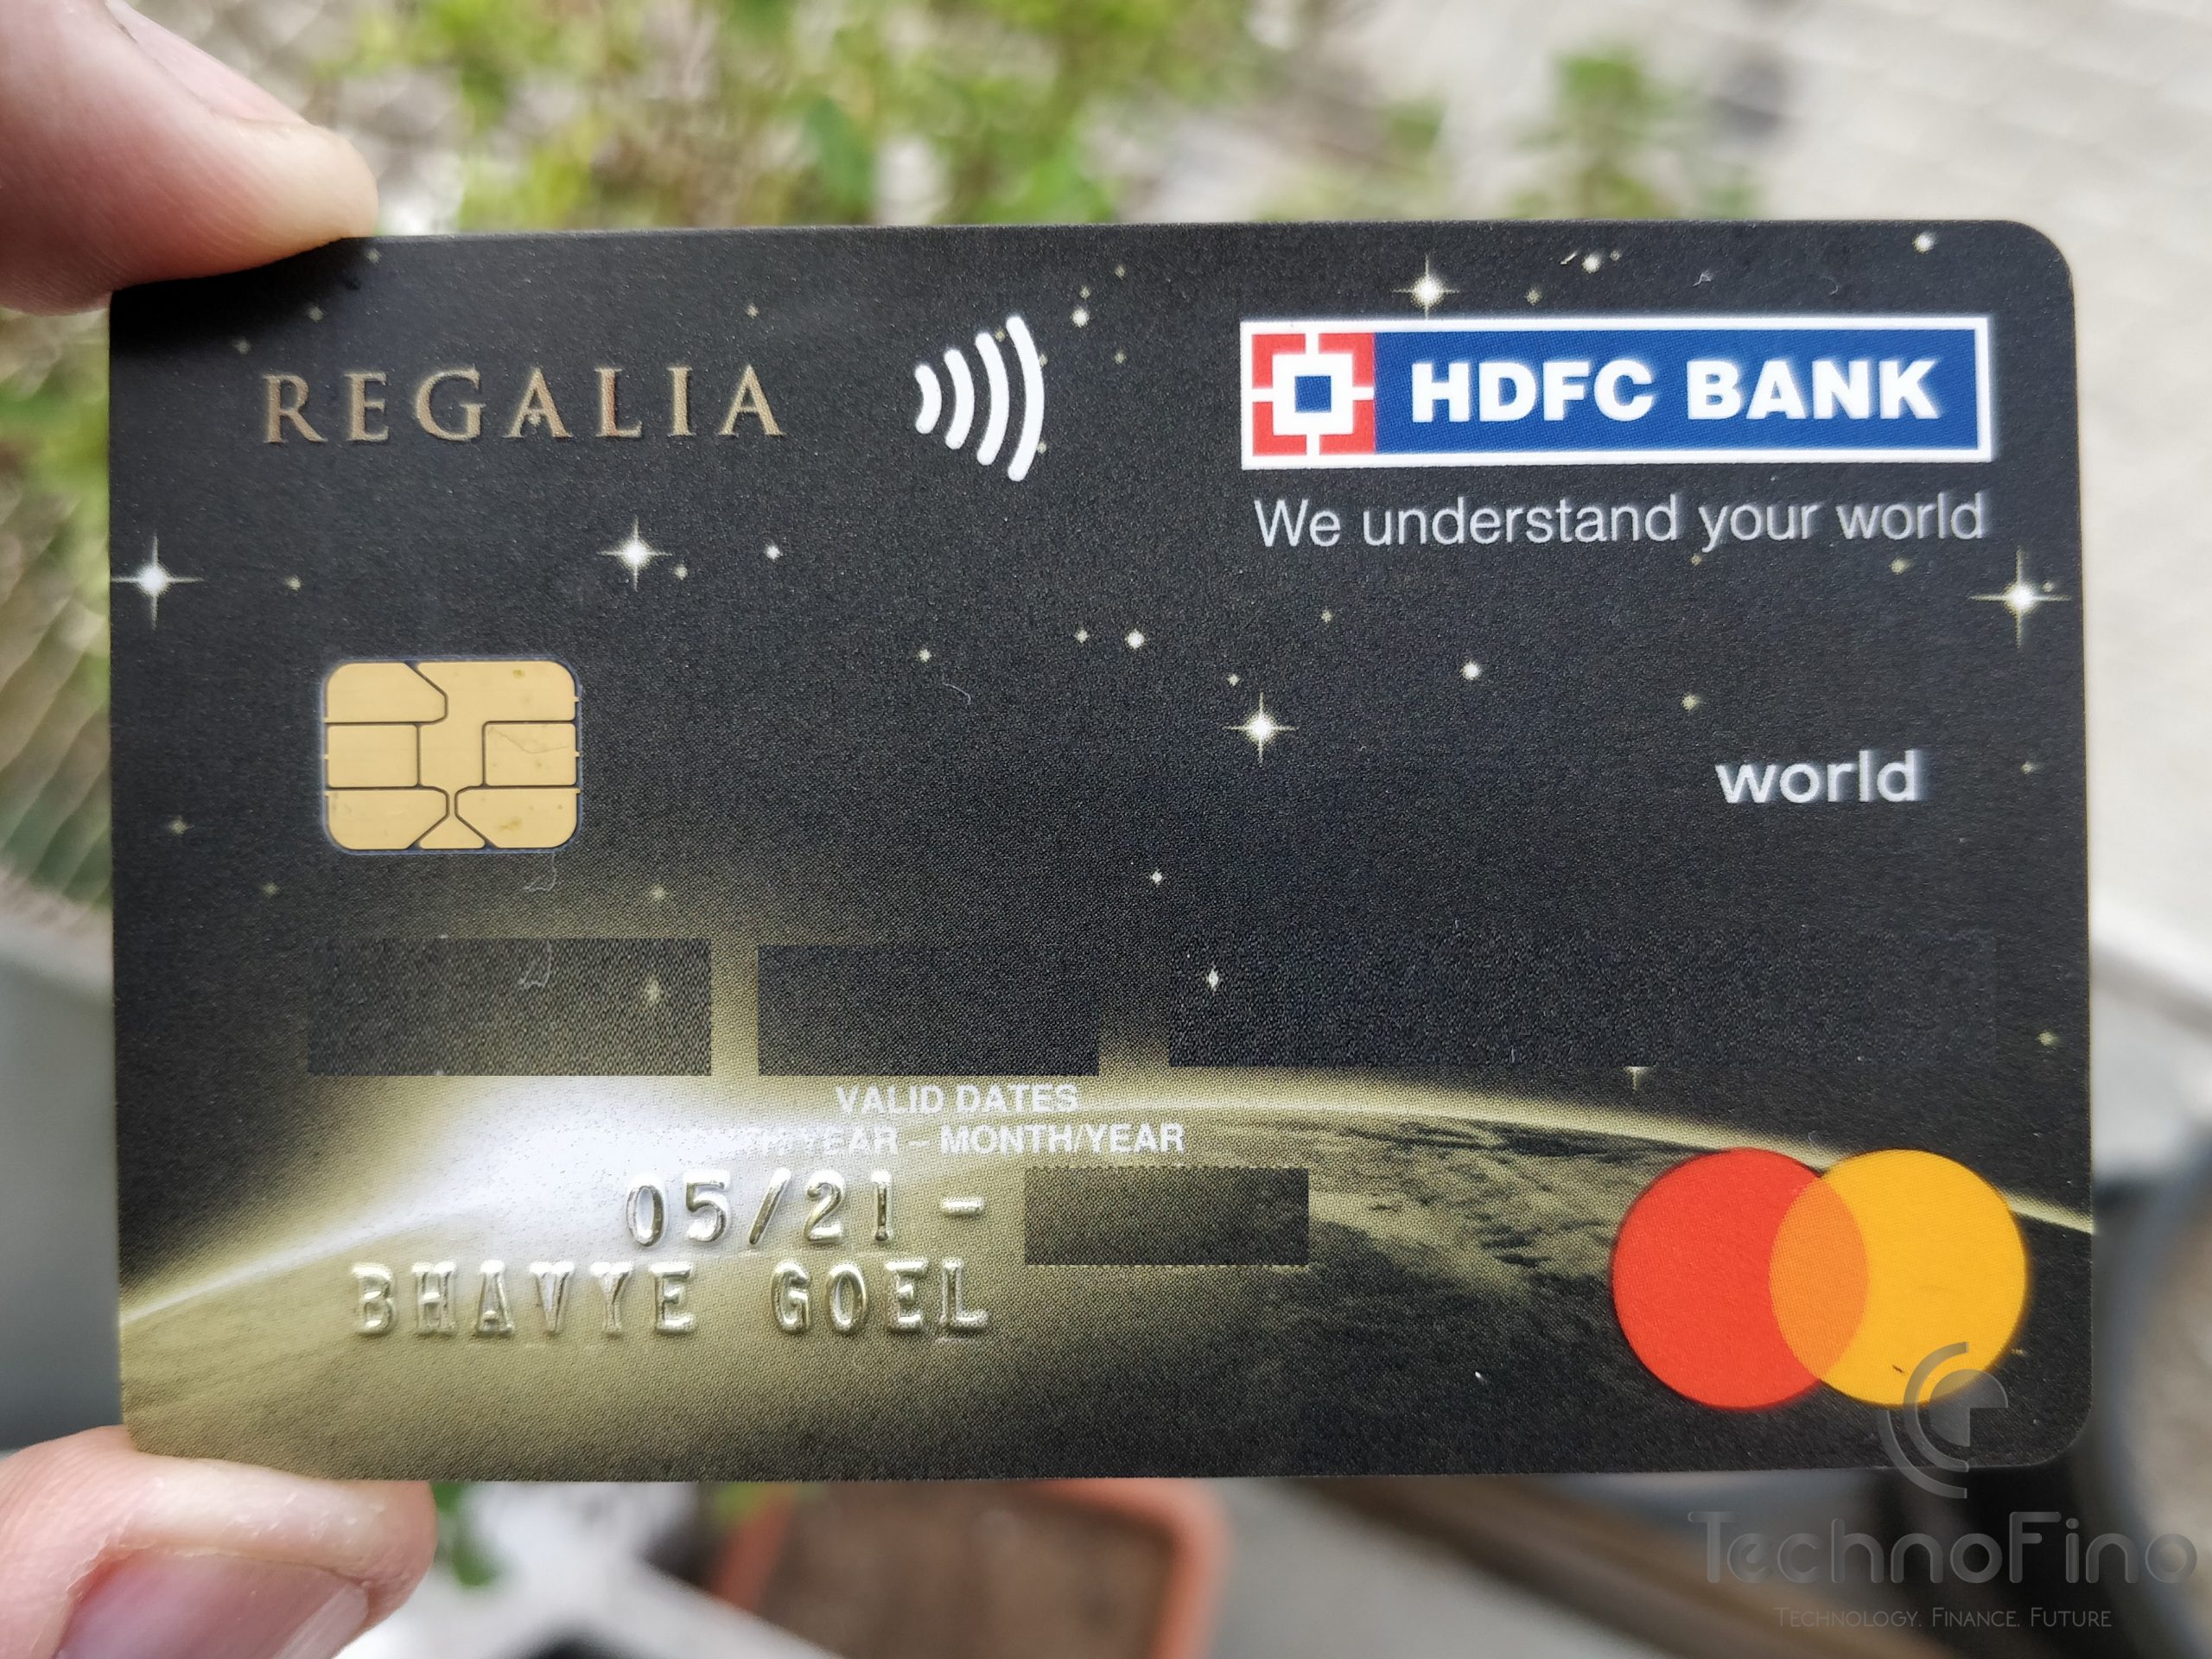 You are currently viewing HDFC Bank Regalia Credit Card Review